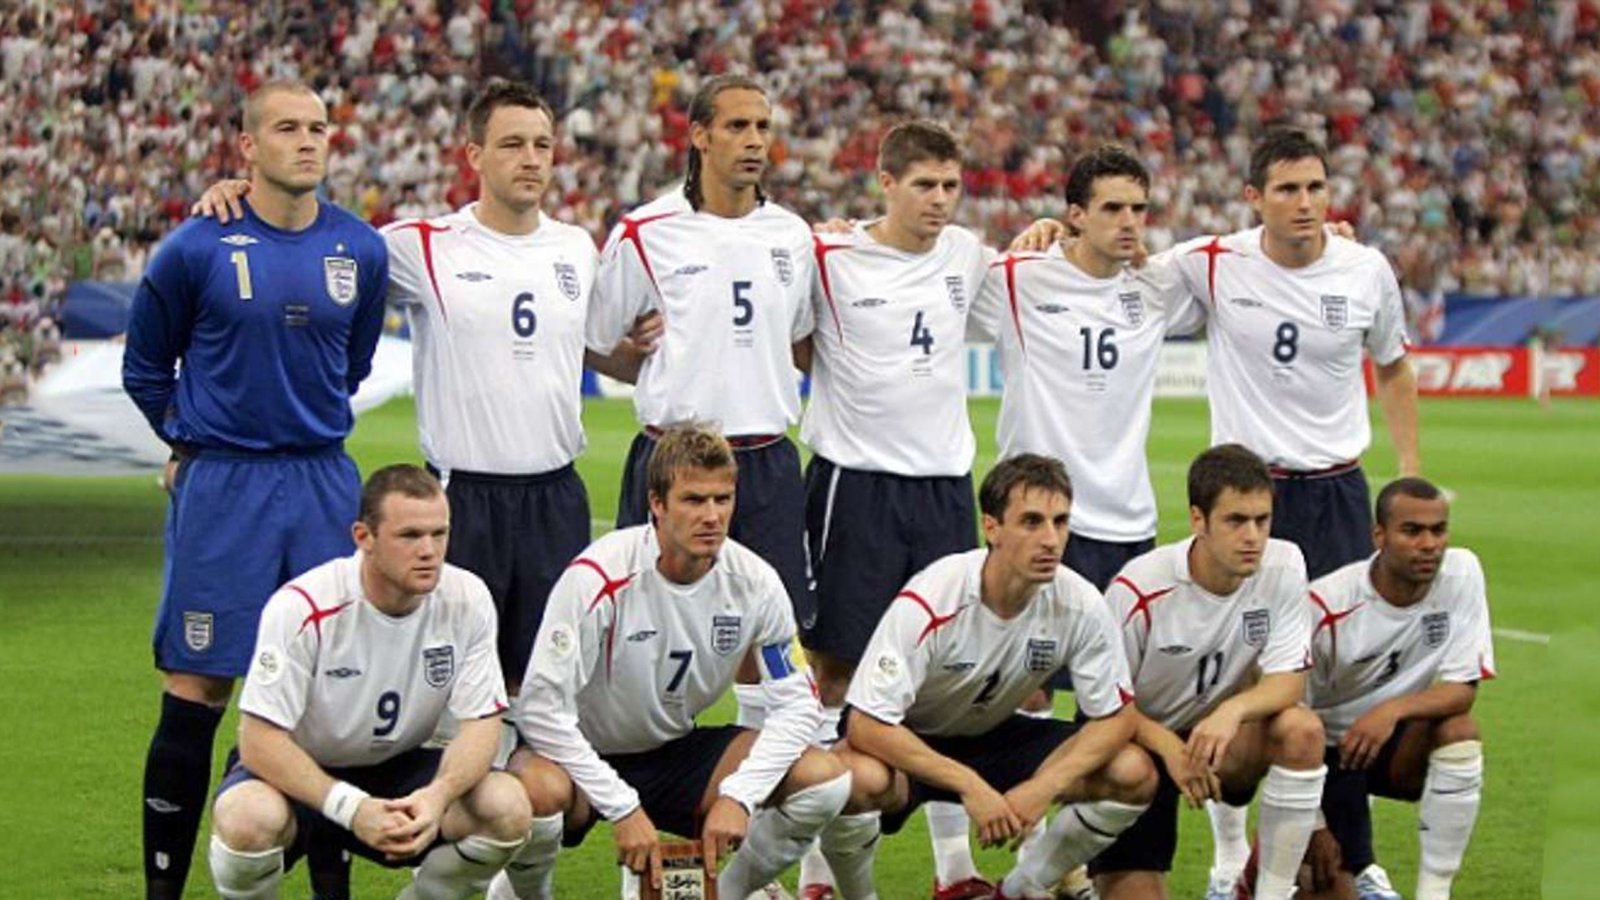 England's starting eleven for the 2006 World Cup